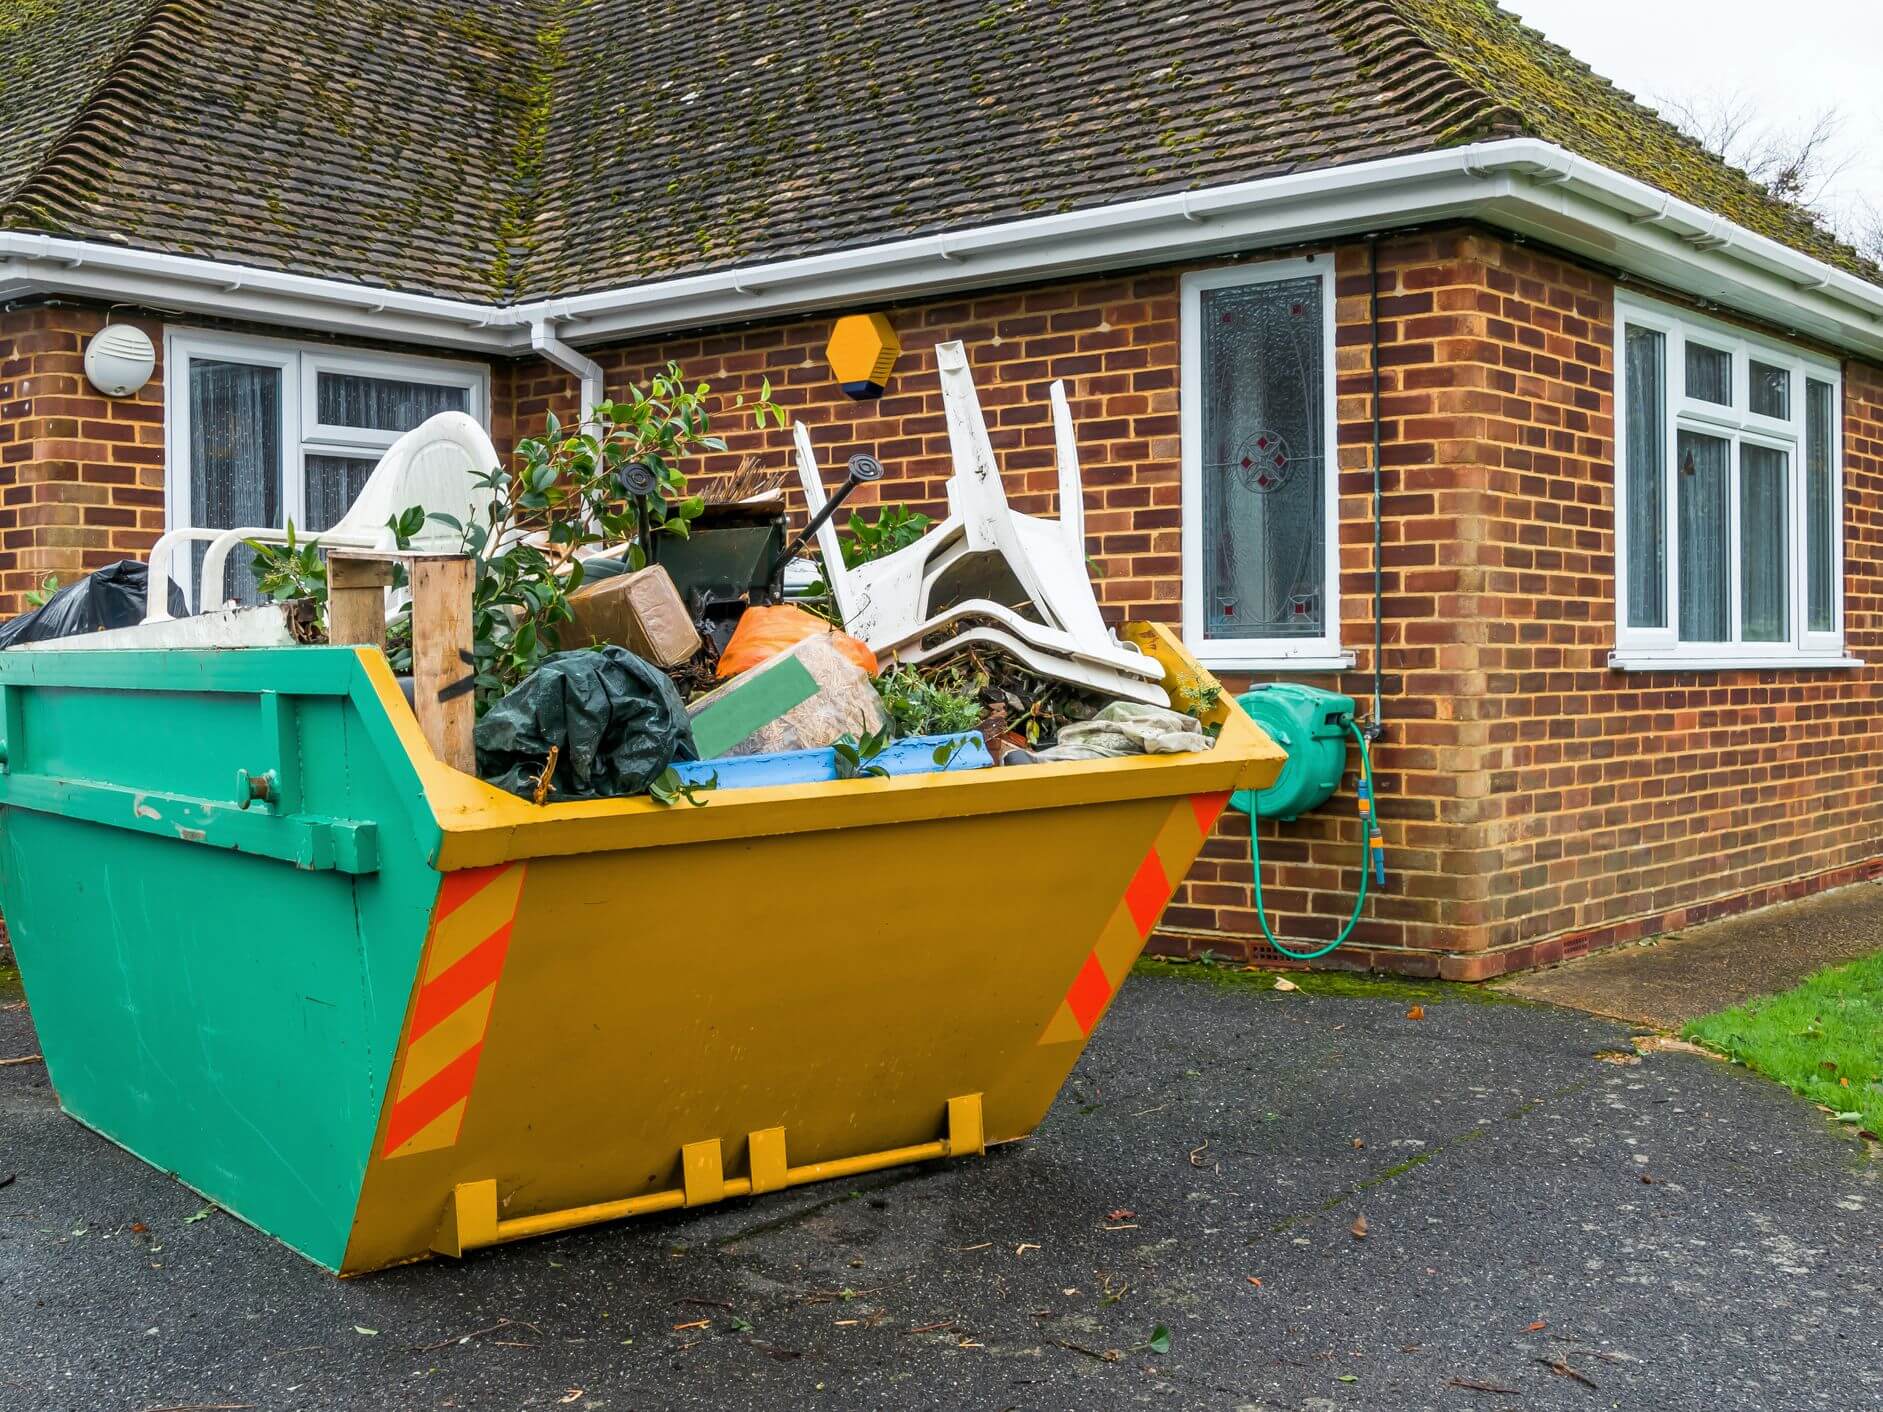 https://pbgjunk.com/wp-content/uploads/2023/01/Waste-Containers-Dumpster-Services-Palm-Beach-Gardens-Junk-Removal-and-Trash-Haulers.jpg